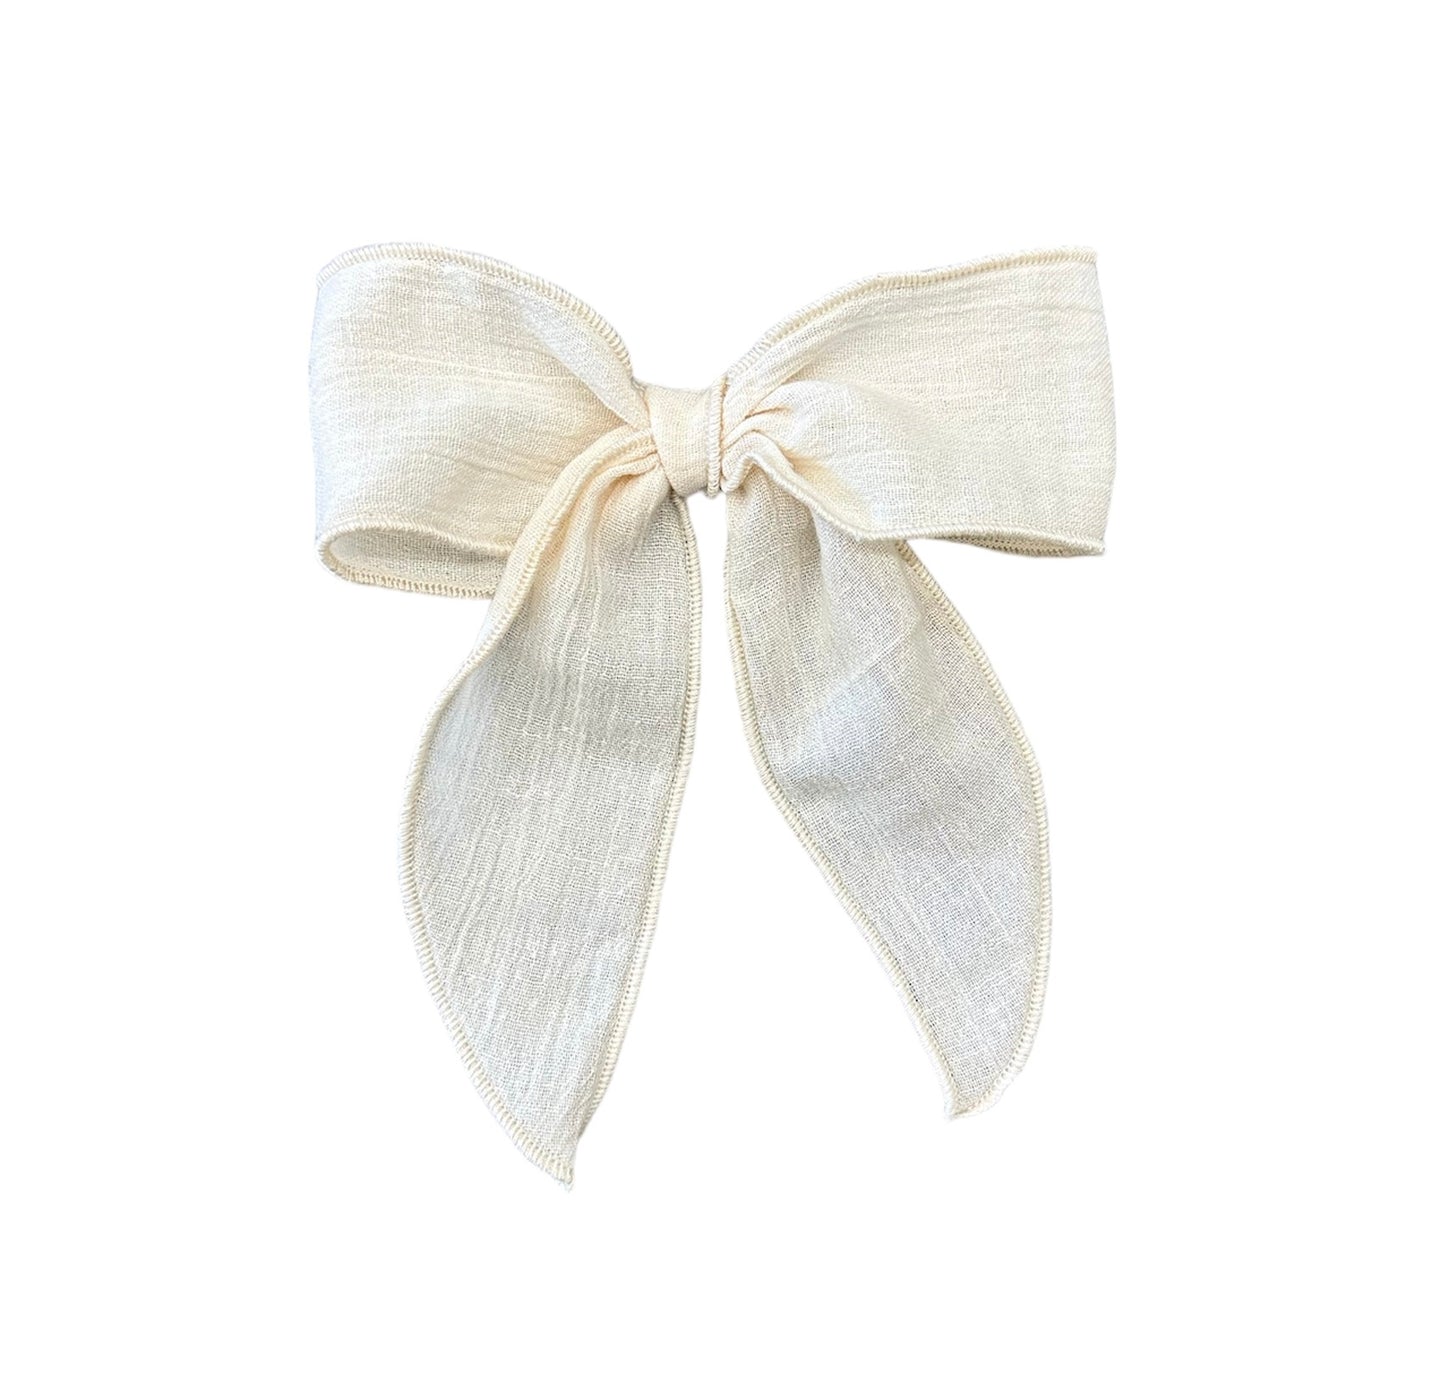 Wee Ones Antique White Cotton Gauze Bow